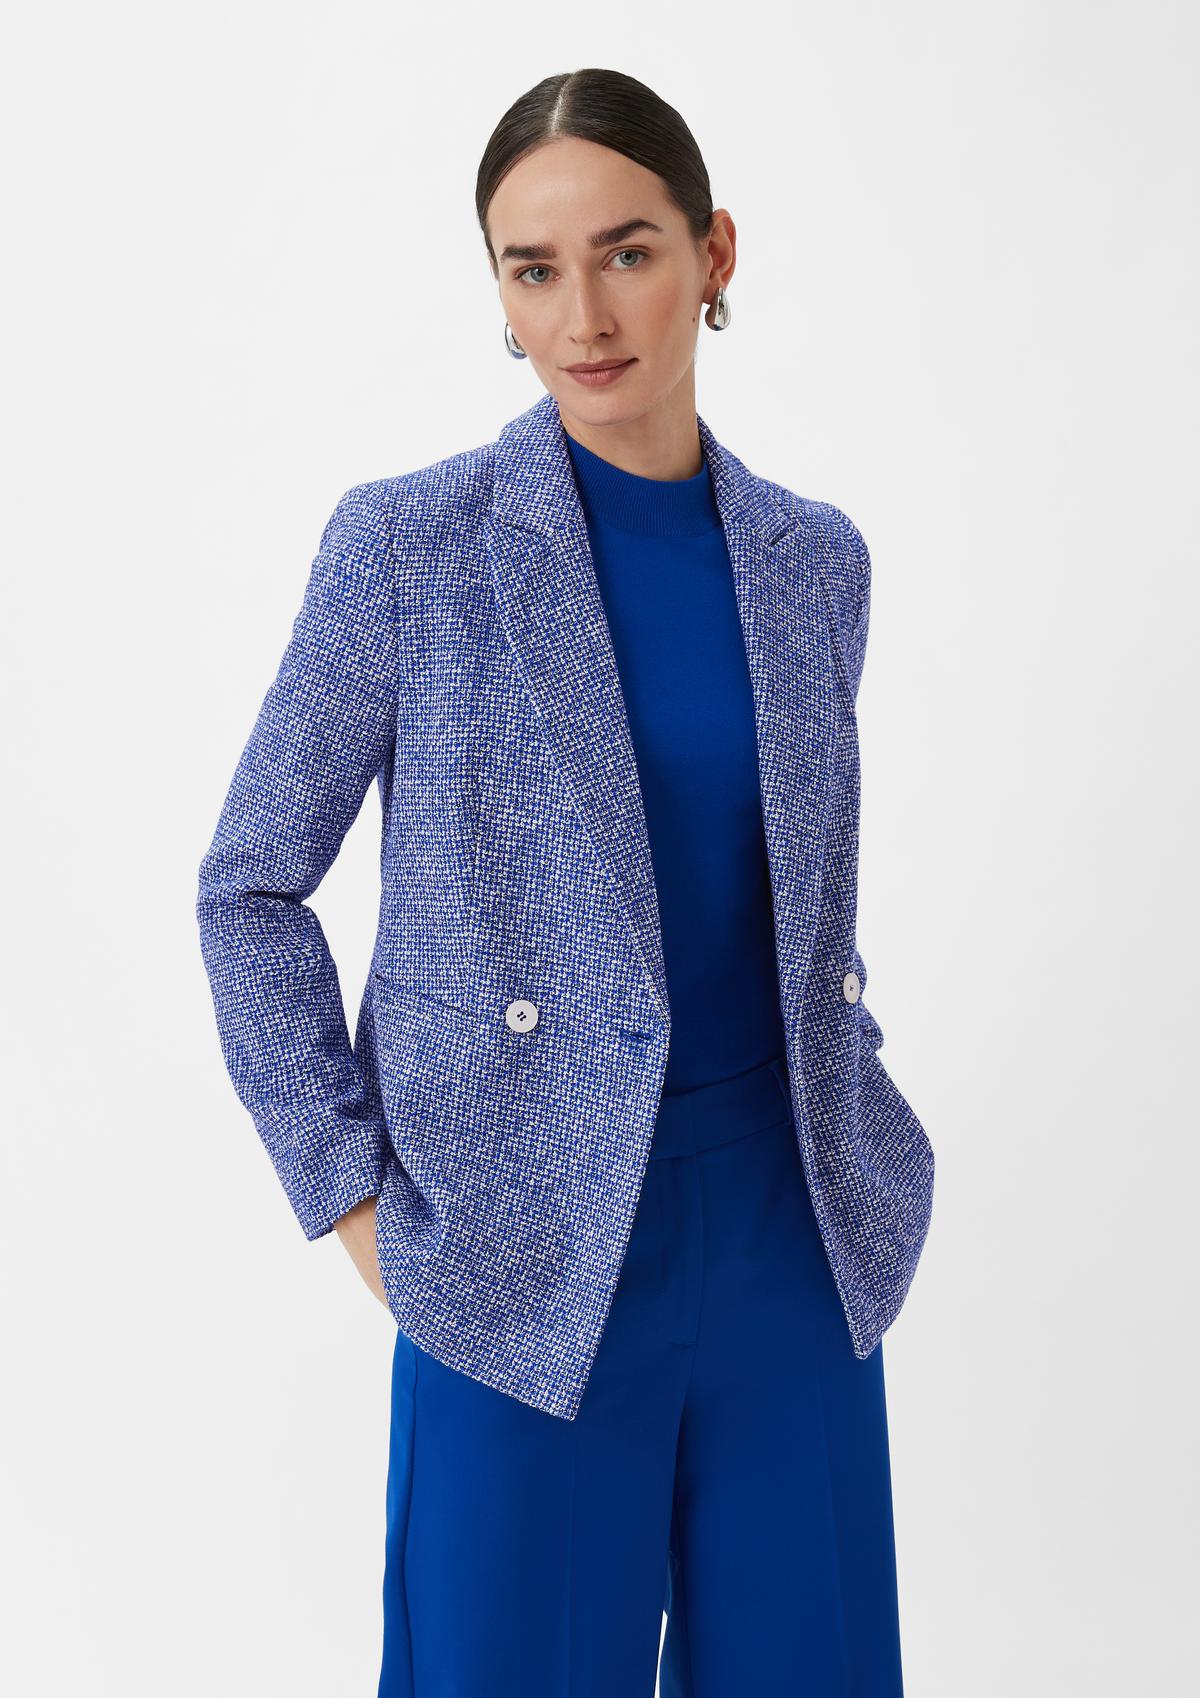 Loose fit blazer with a textured pattern